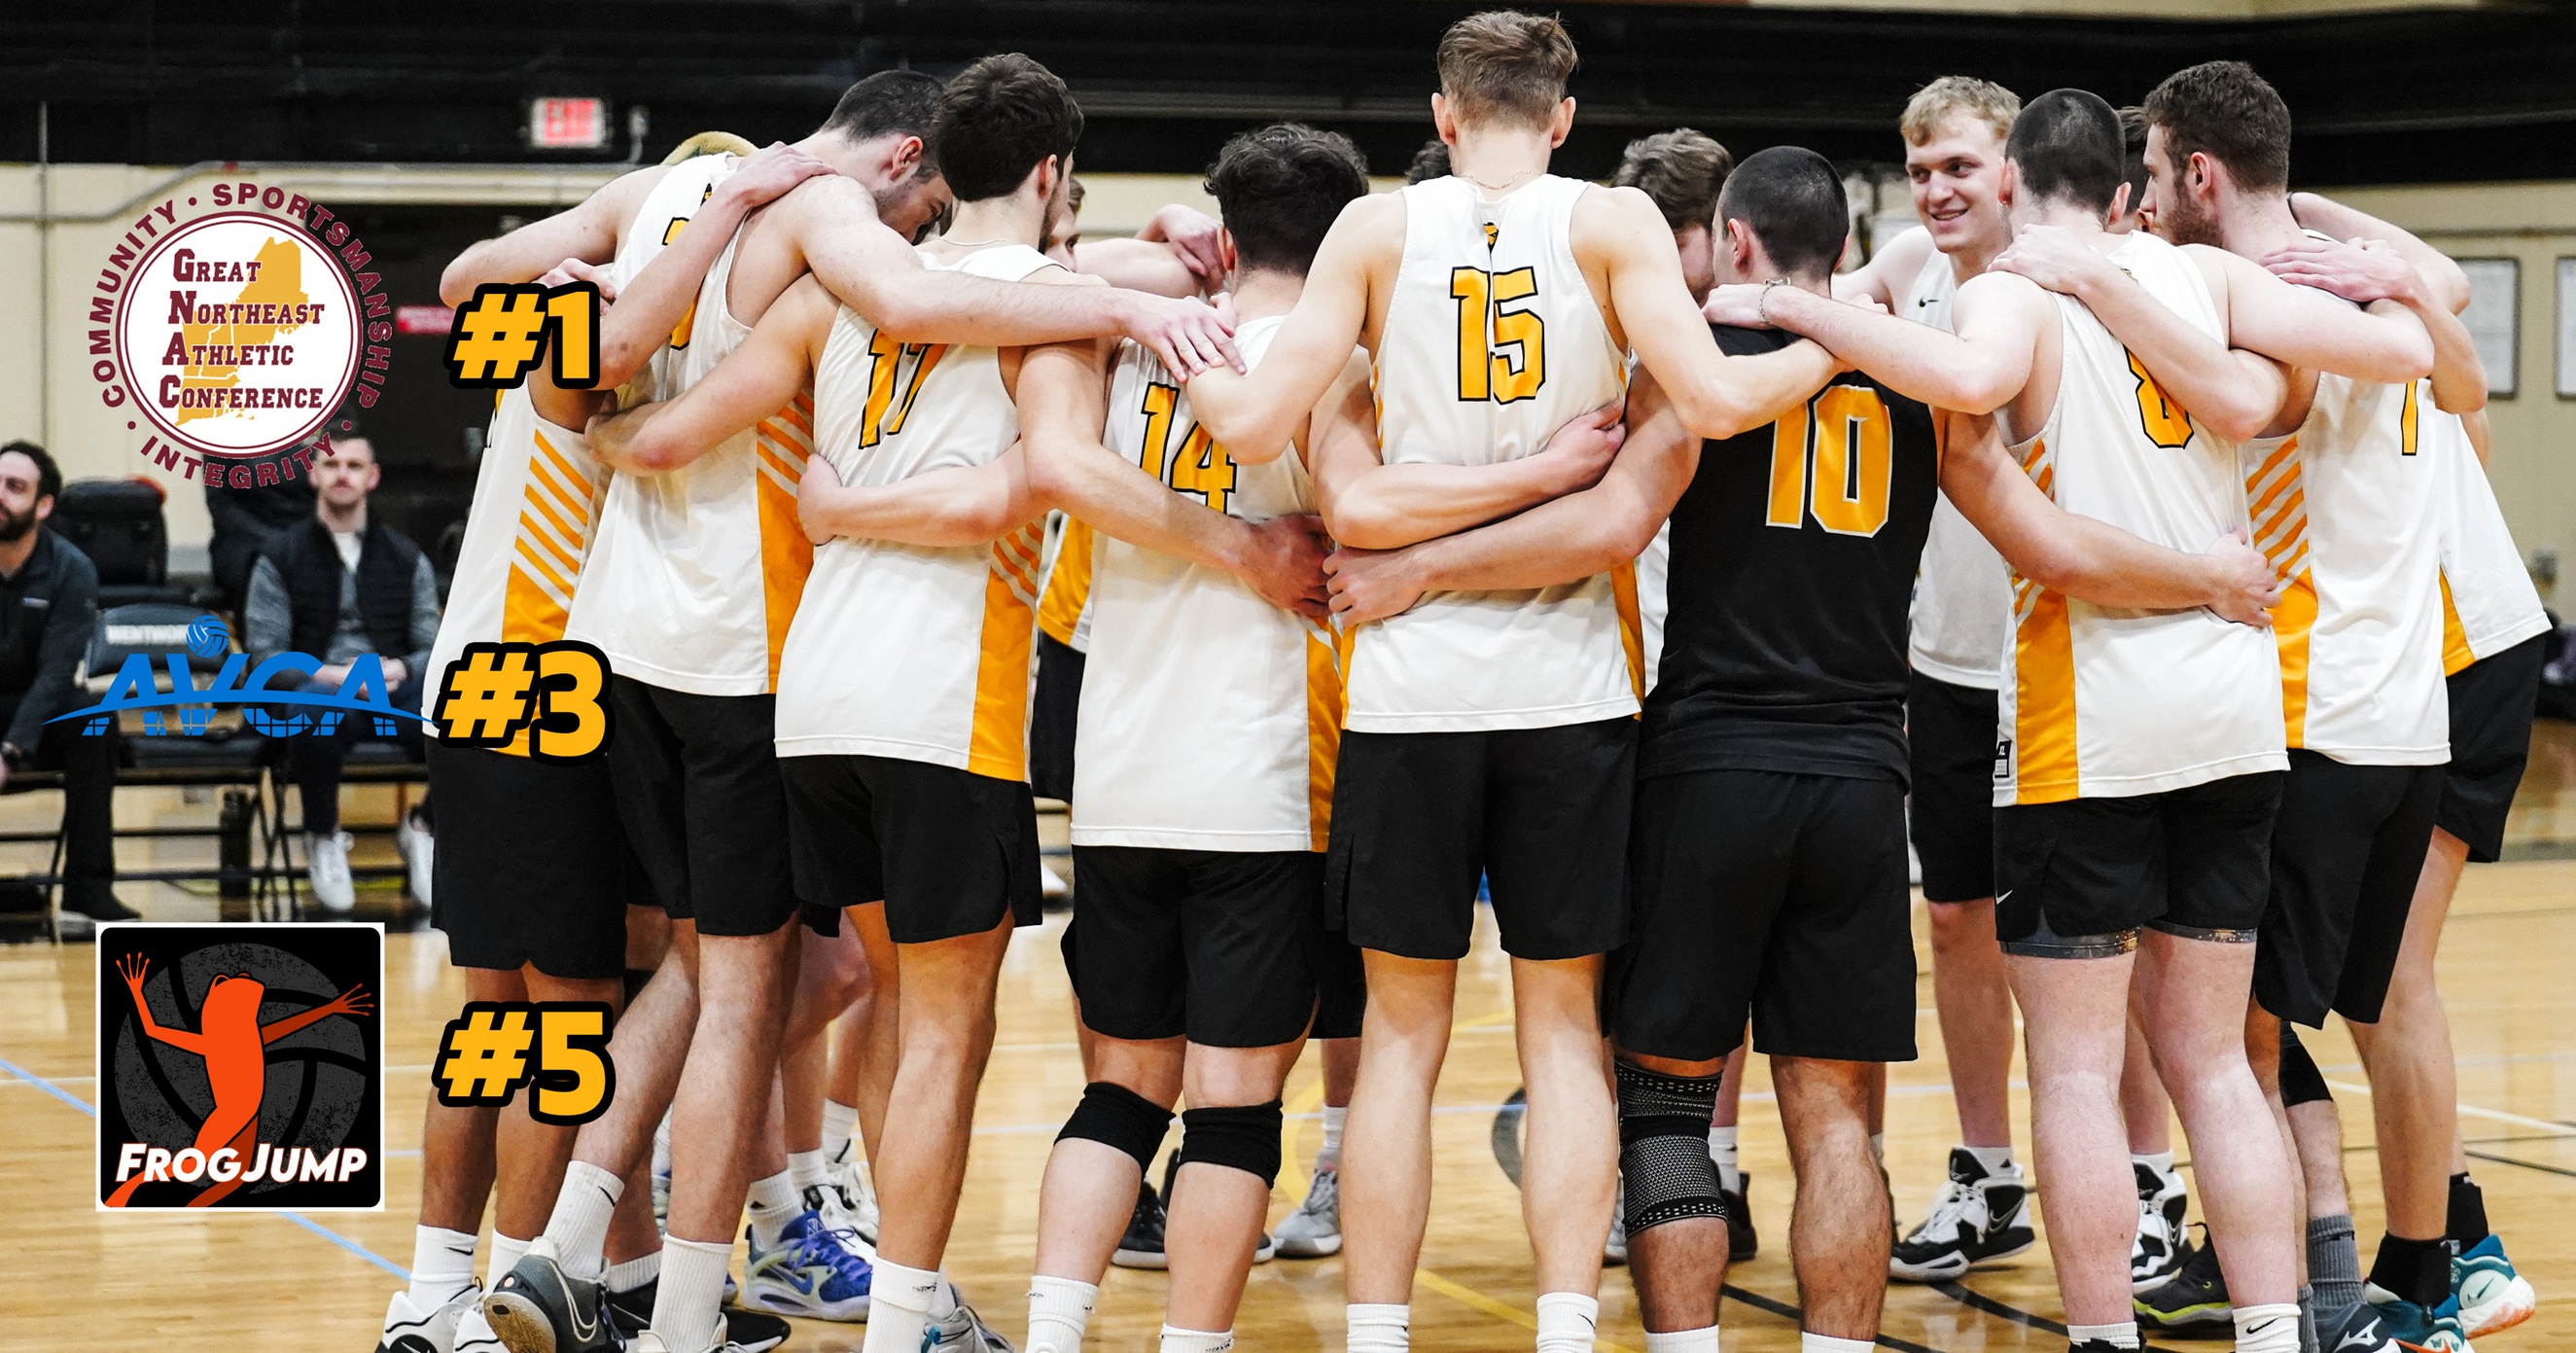 Picked to Three-Peat as GNAC Champions, Nationally Ranked Men’s Volleyball Among Early Favorites in Division III